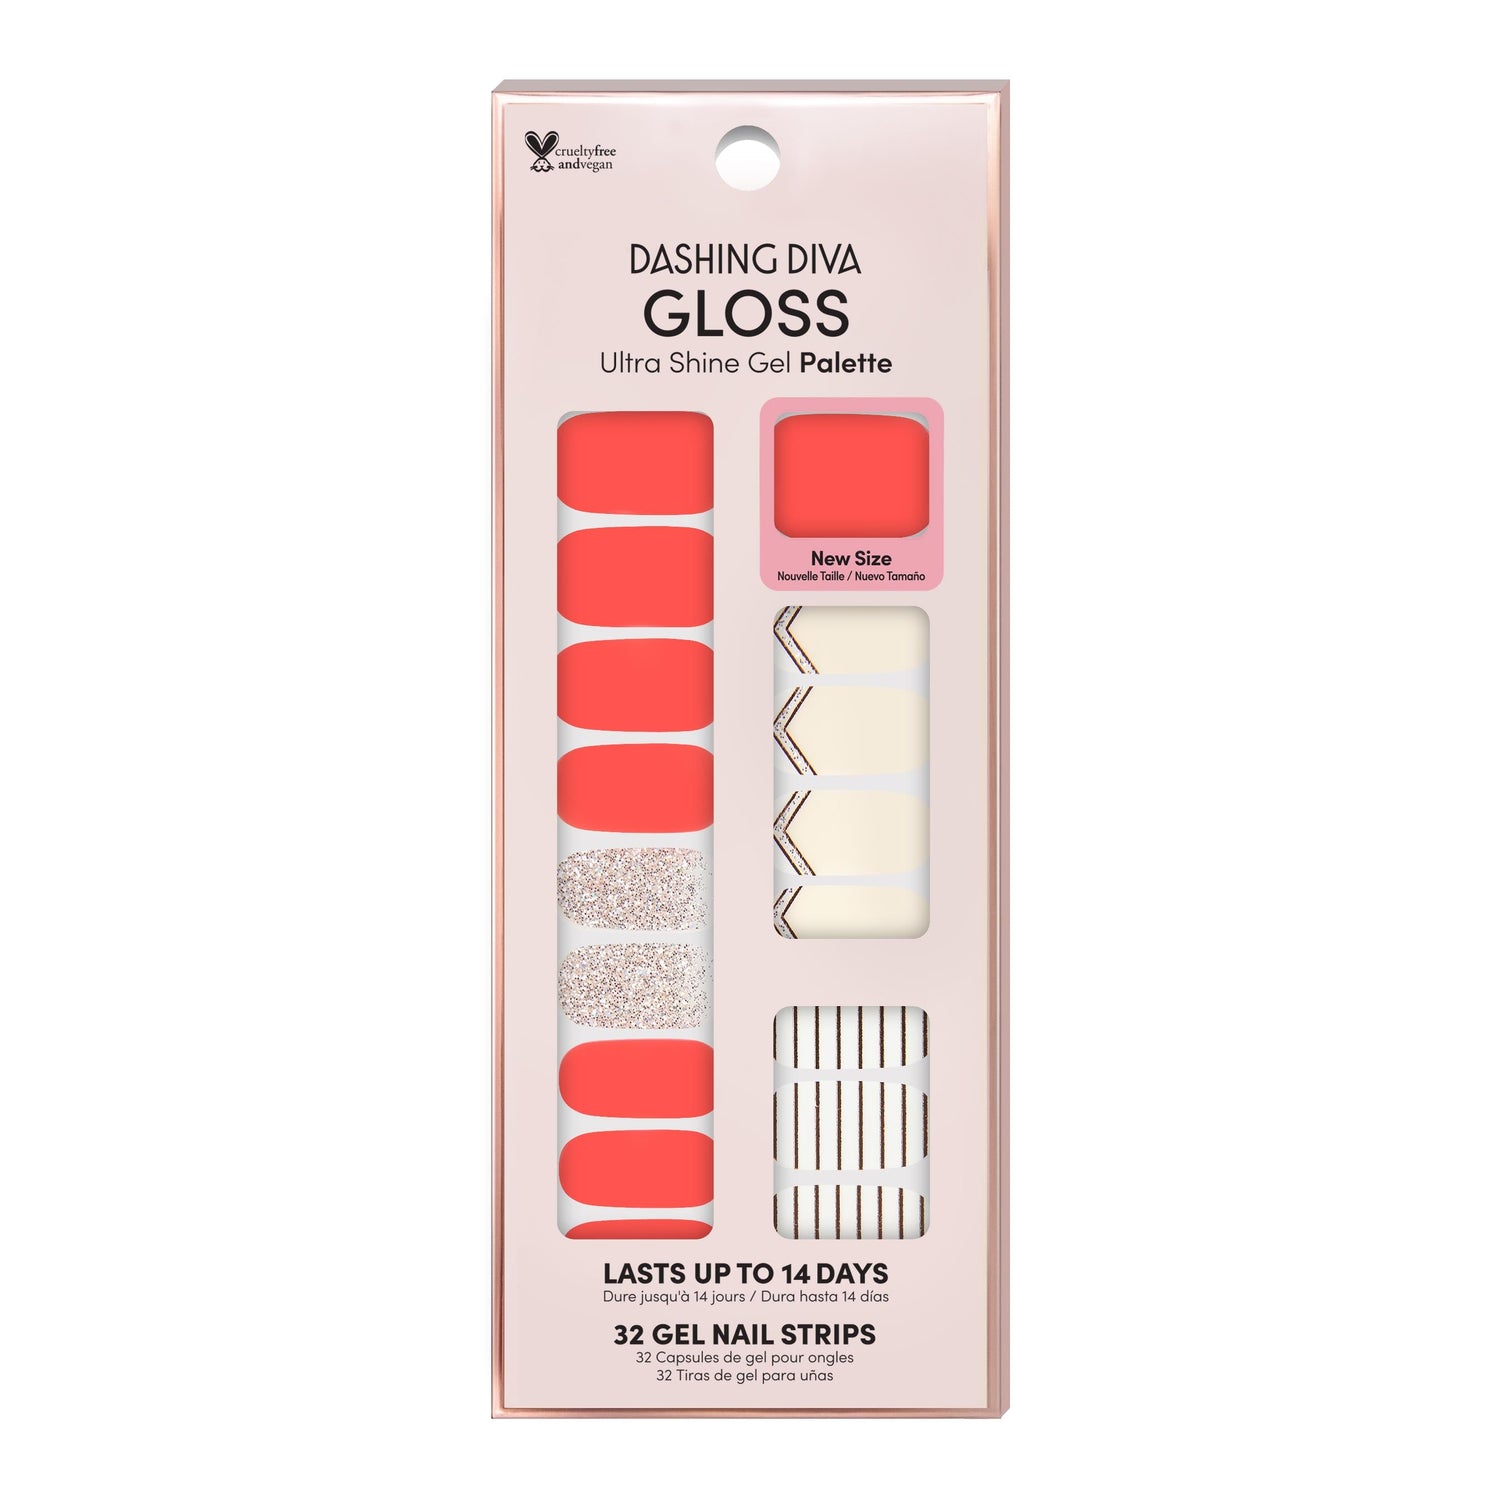 Dashing Diva GLOSS coral gel nail strips with gold glitter and geometric line accents.